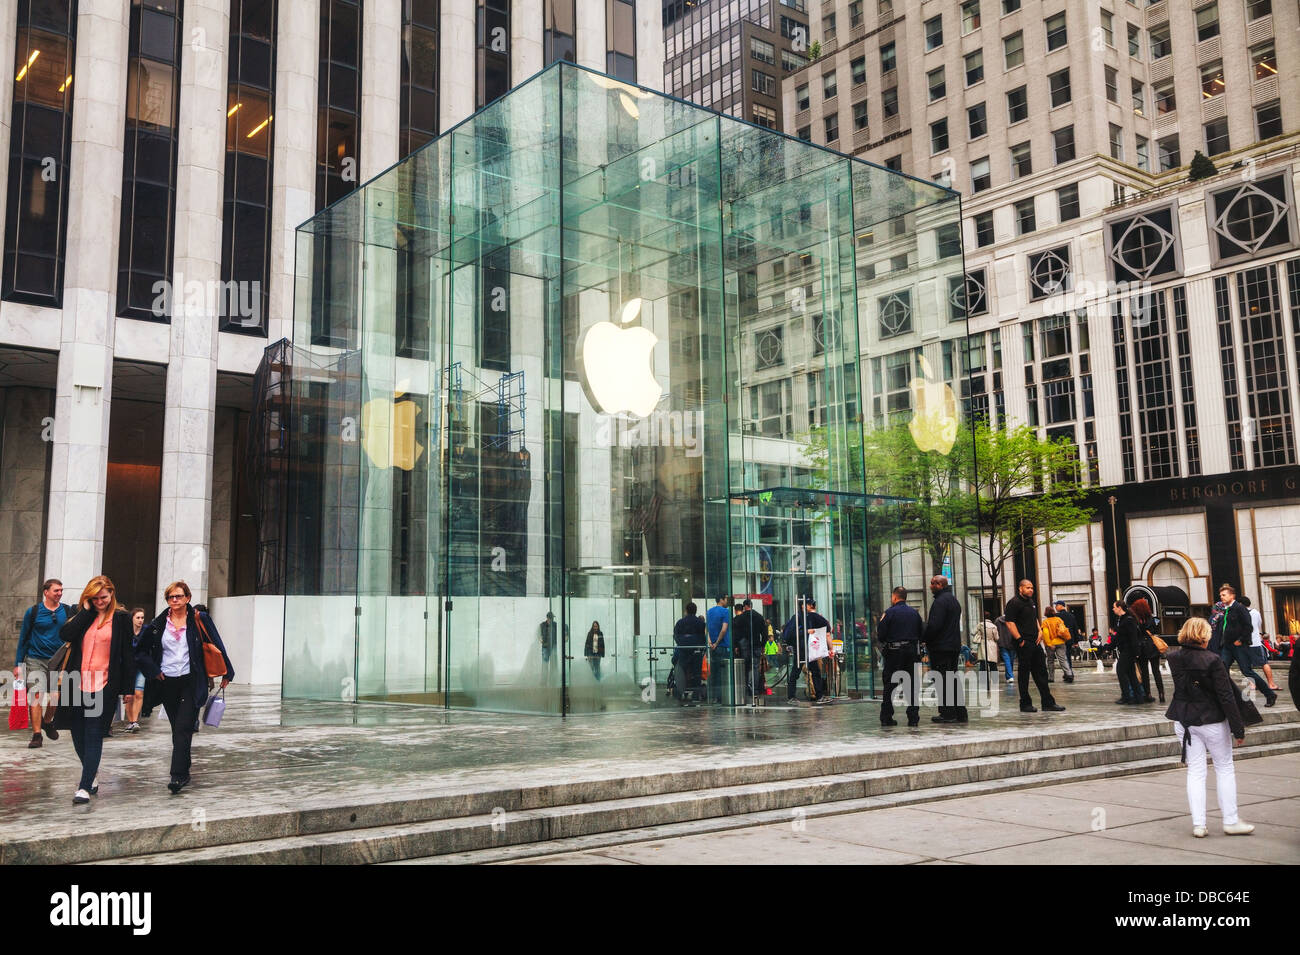 Entrance to Apple retail store in New York. The Apple Store is a chain of retail stores owned and operated by Apple Inc. Stock Photo